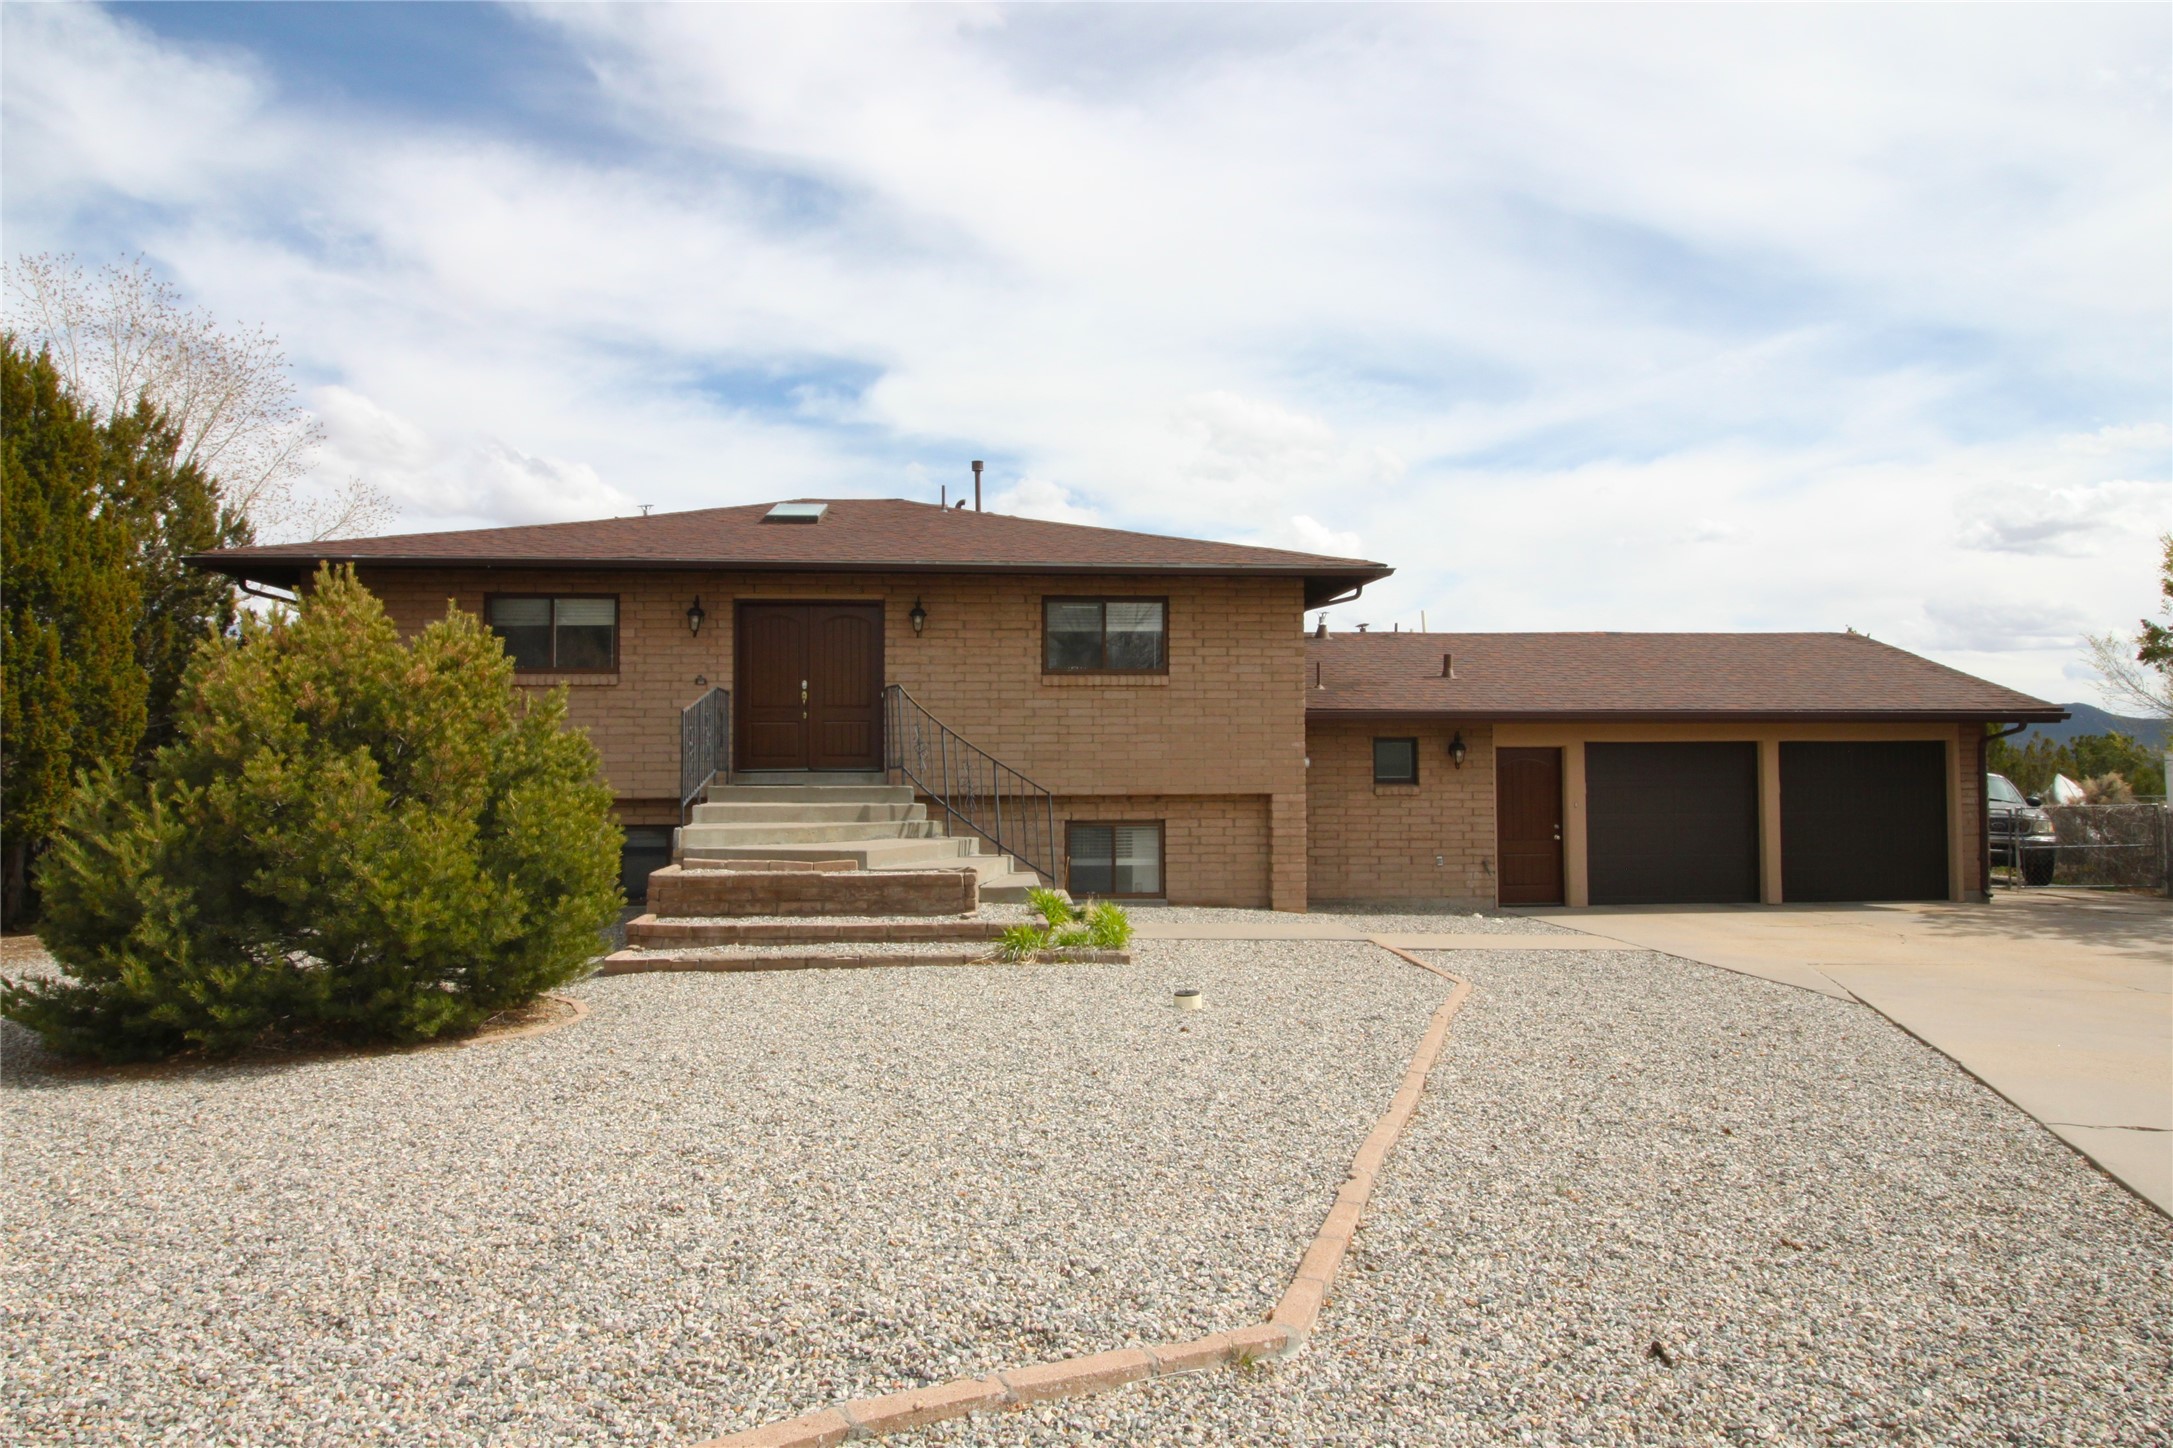 112 Glenview Drive, White Rock, New Mexico 87547, 5 Bedrooms Bedrooms, ,3 BathroomsBathrooms,Residential,For Sale,112 Glenview Drive,202401393